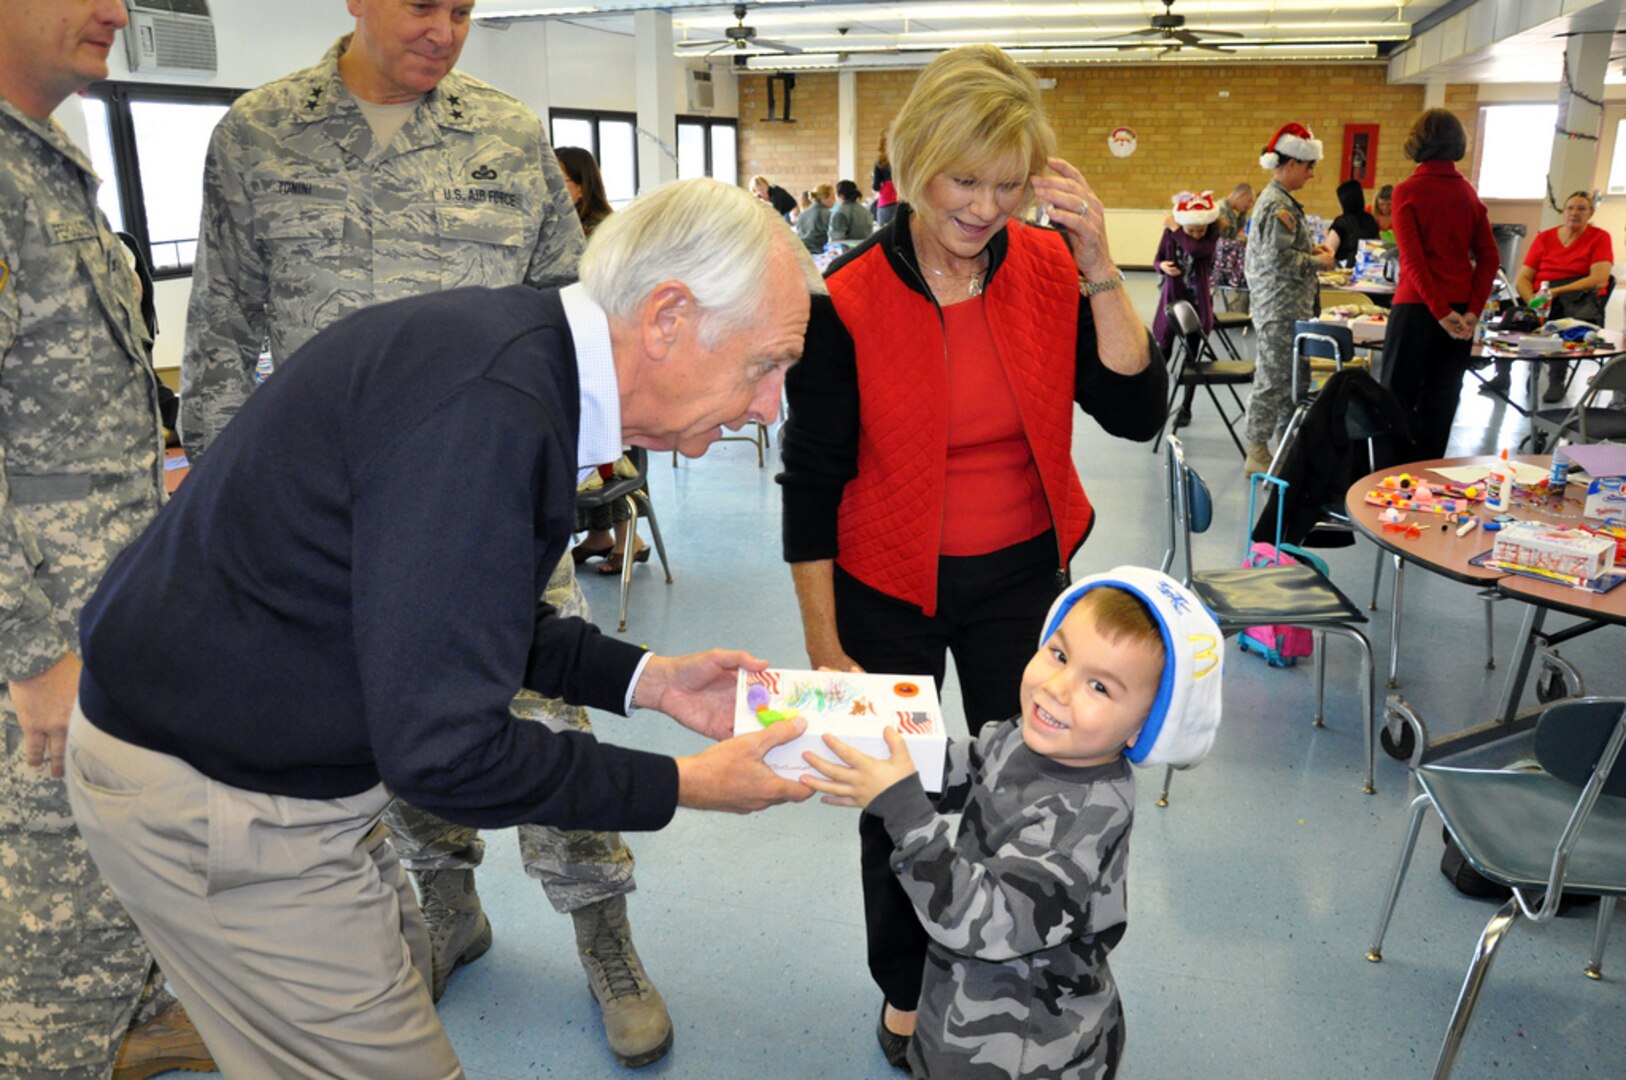 Kentucky Governor Steve Beshear and First lady, Jane Beshear, examine Leland Caty's specially decorated keep-sake during a holiday celebration held in Idependence, Ky., on Dec. 3, 2011. Caty's step-father, Army Spc. Neal McIver is a member of the 1204th Aviation Support Battalion of the Kentucky National Guard.